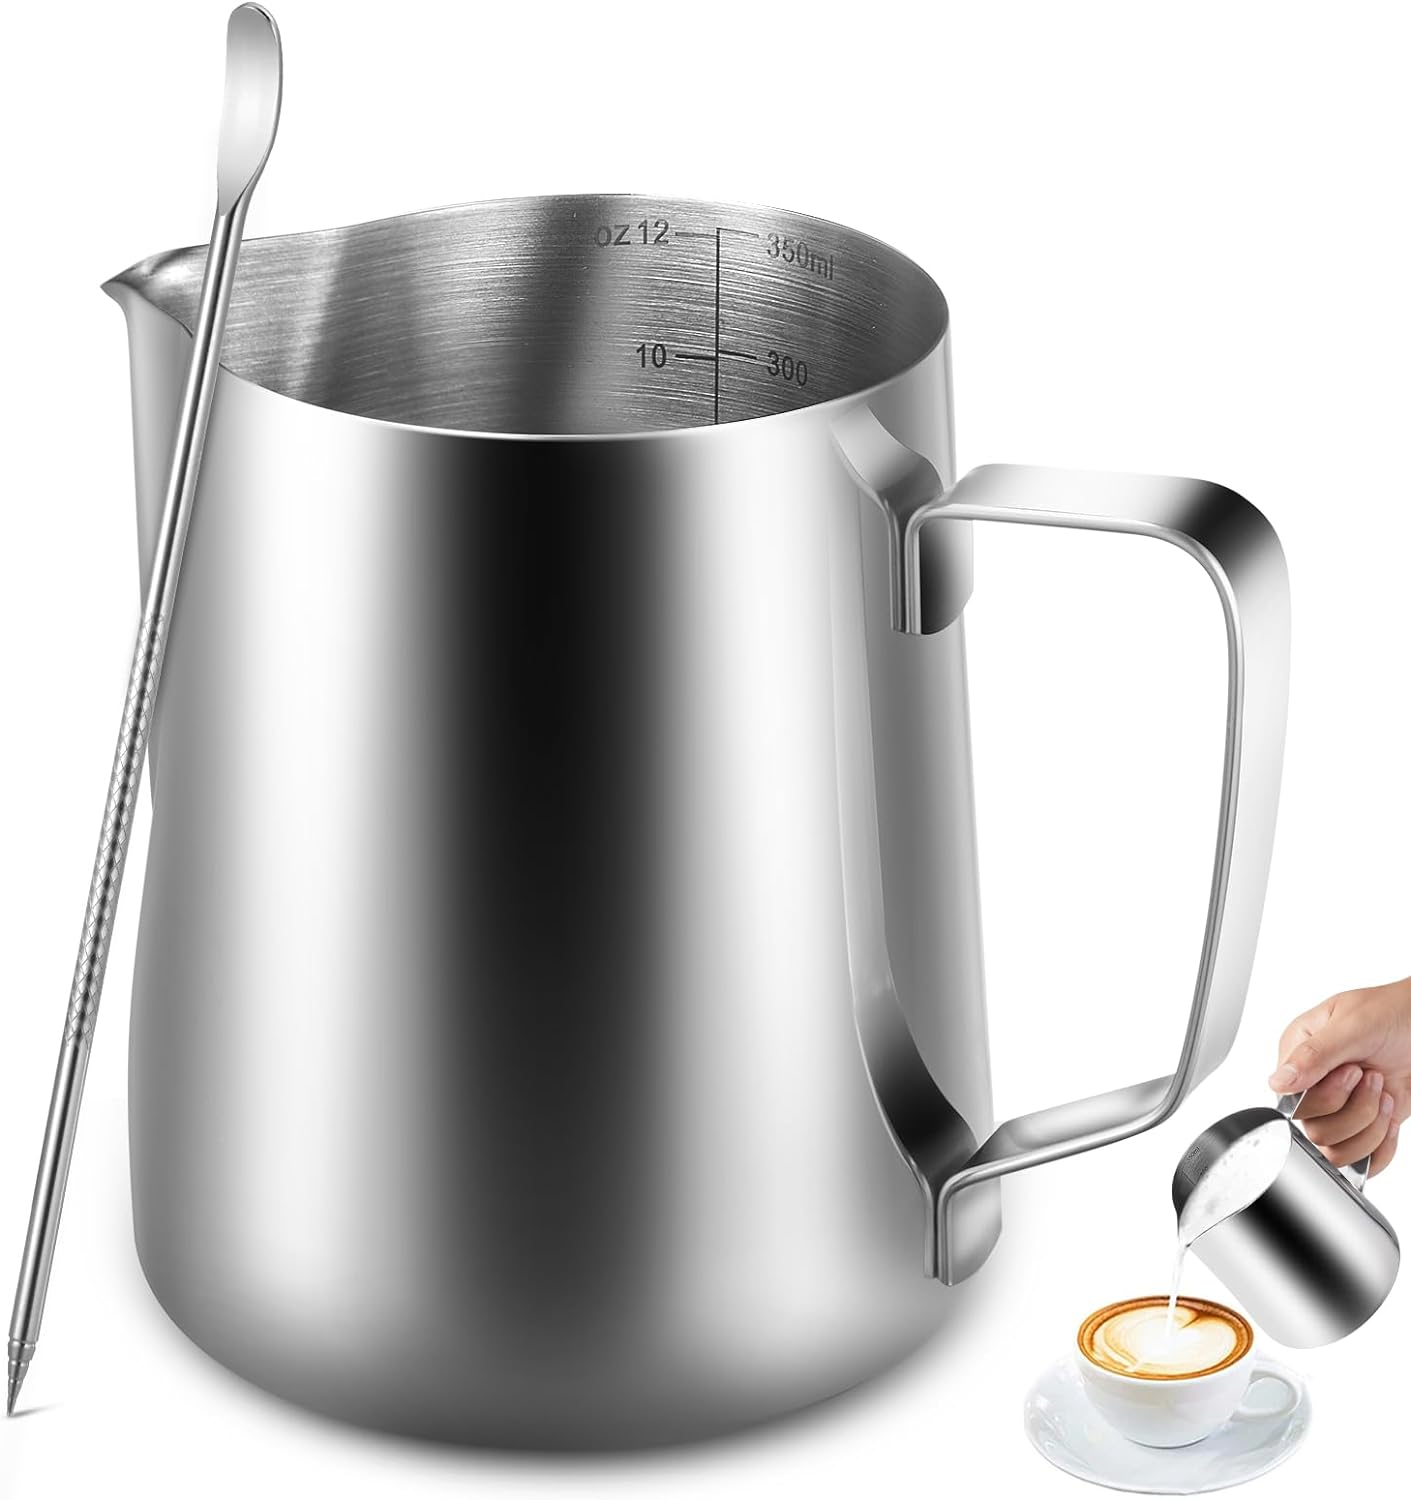 Anpro Milk Jug 350ml/12 fl.oz, 304 Stainless Steel Milk Pitcher, Milk Frothing Jug for Making Coffee Cappuccino